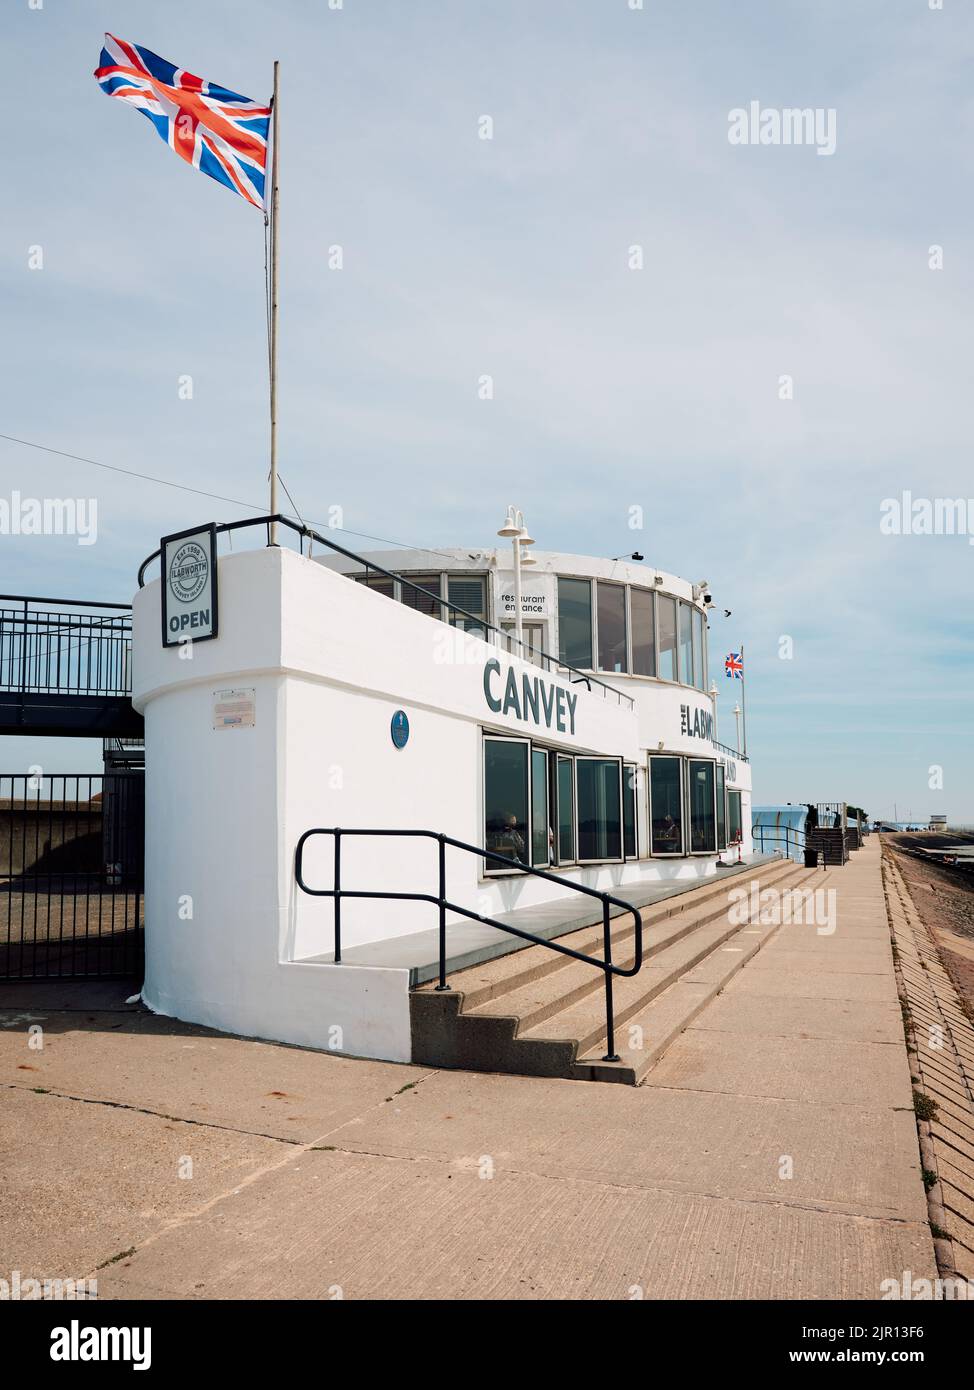 The modernist concrete architecture of the Labworth Cafe ion the coast at Canvey Island, Thames Estuary, Essex, England, UK Stock Photo